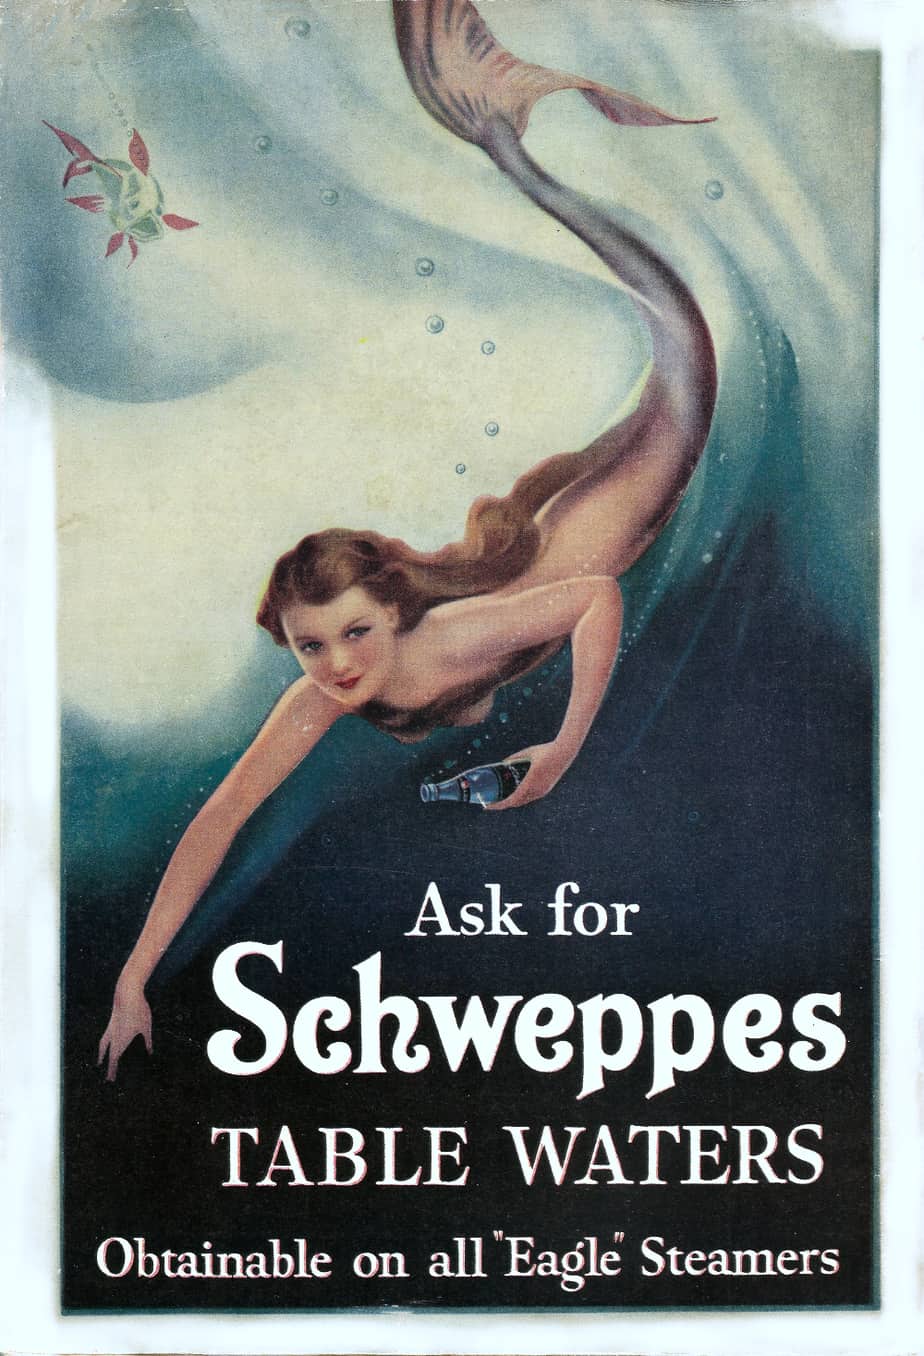 1937 Schweppes Table Waters advertisement with mermaid